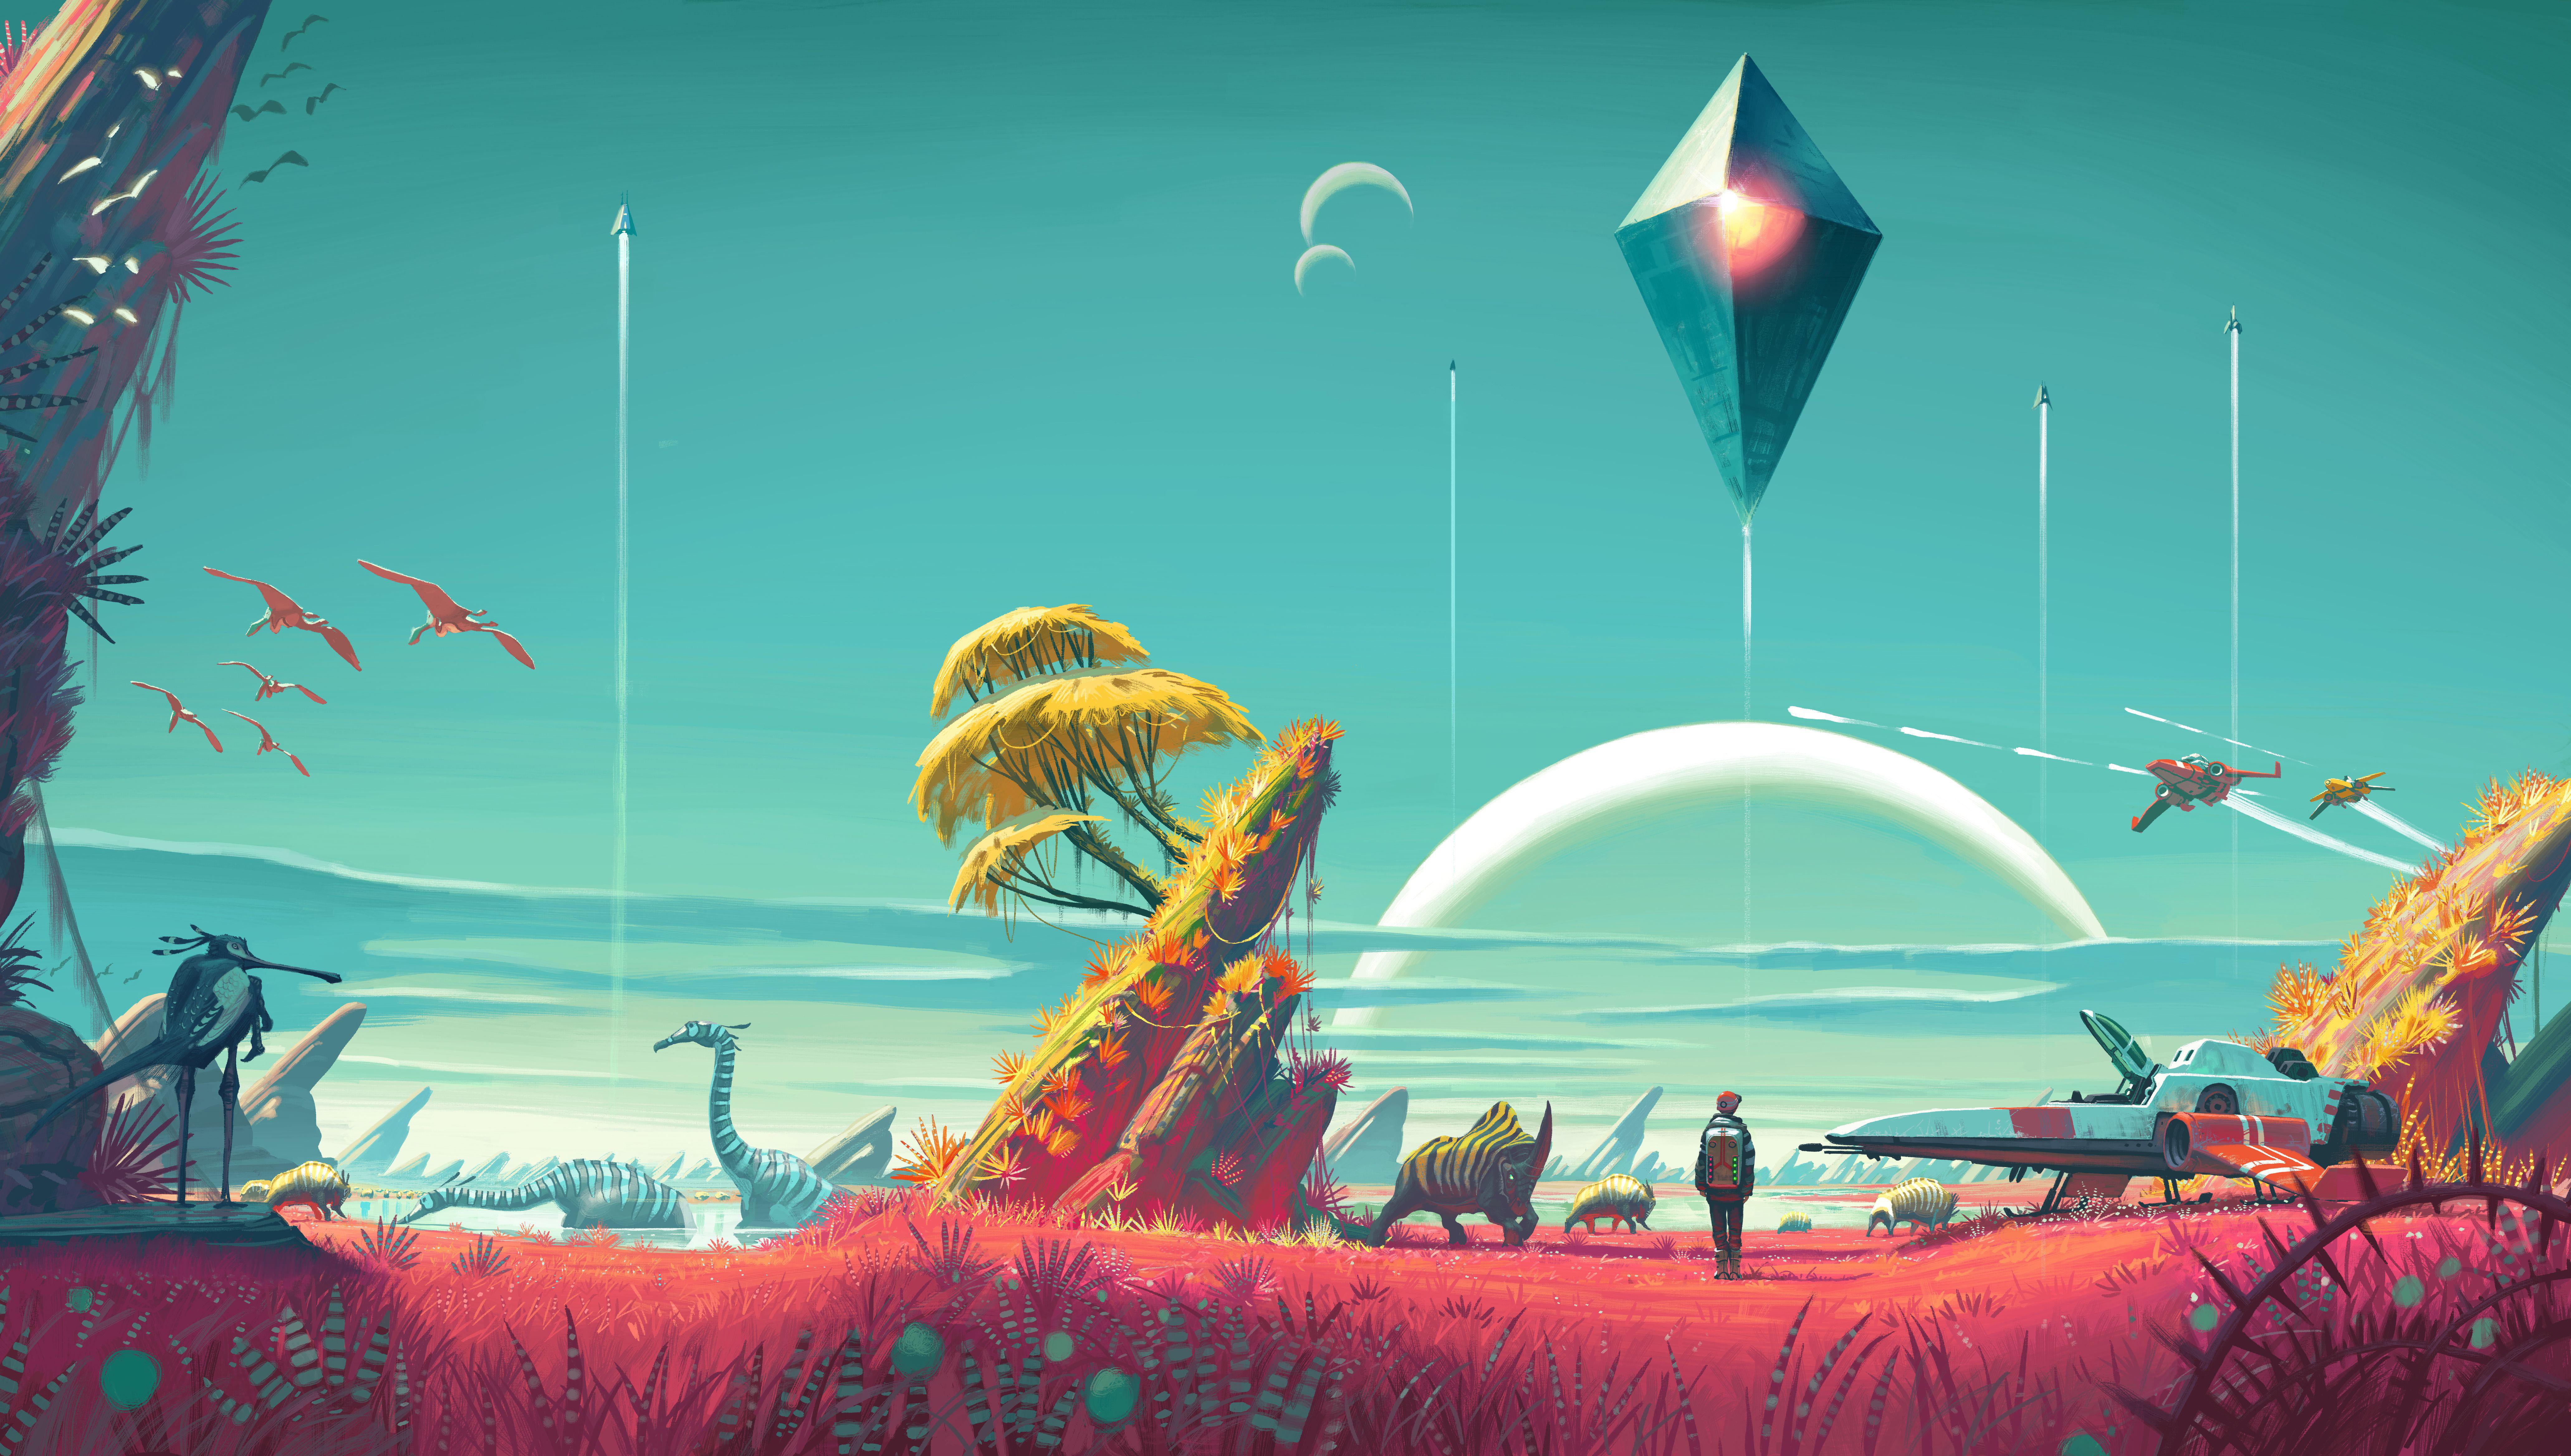 General 8250x4672 No Man's Sky digital art video games pink blue turquoise PC gaming video game art science fiction